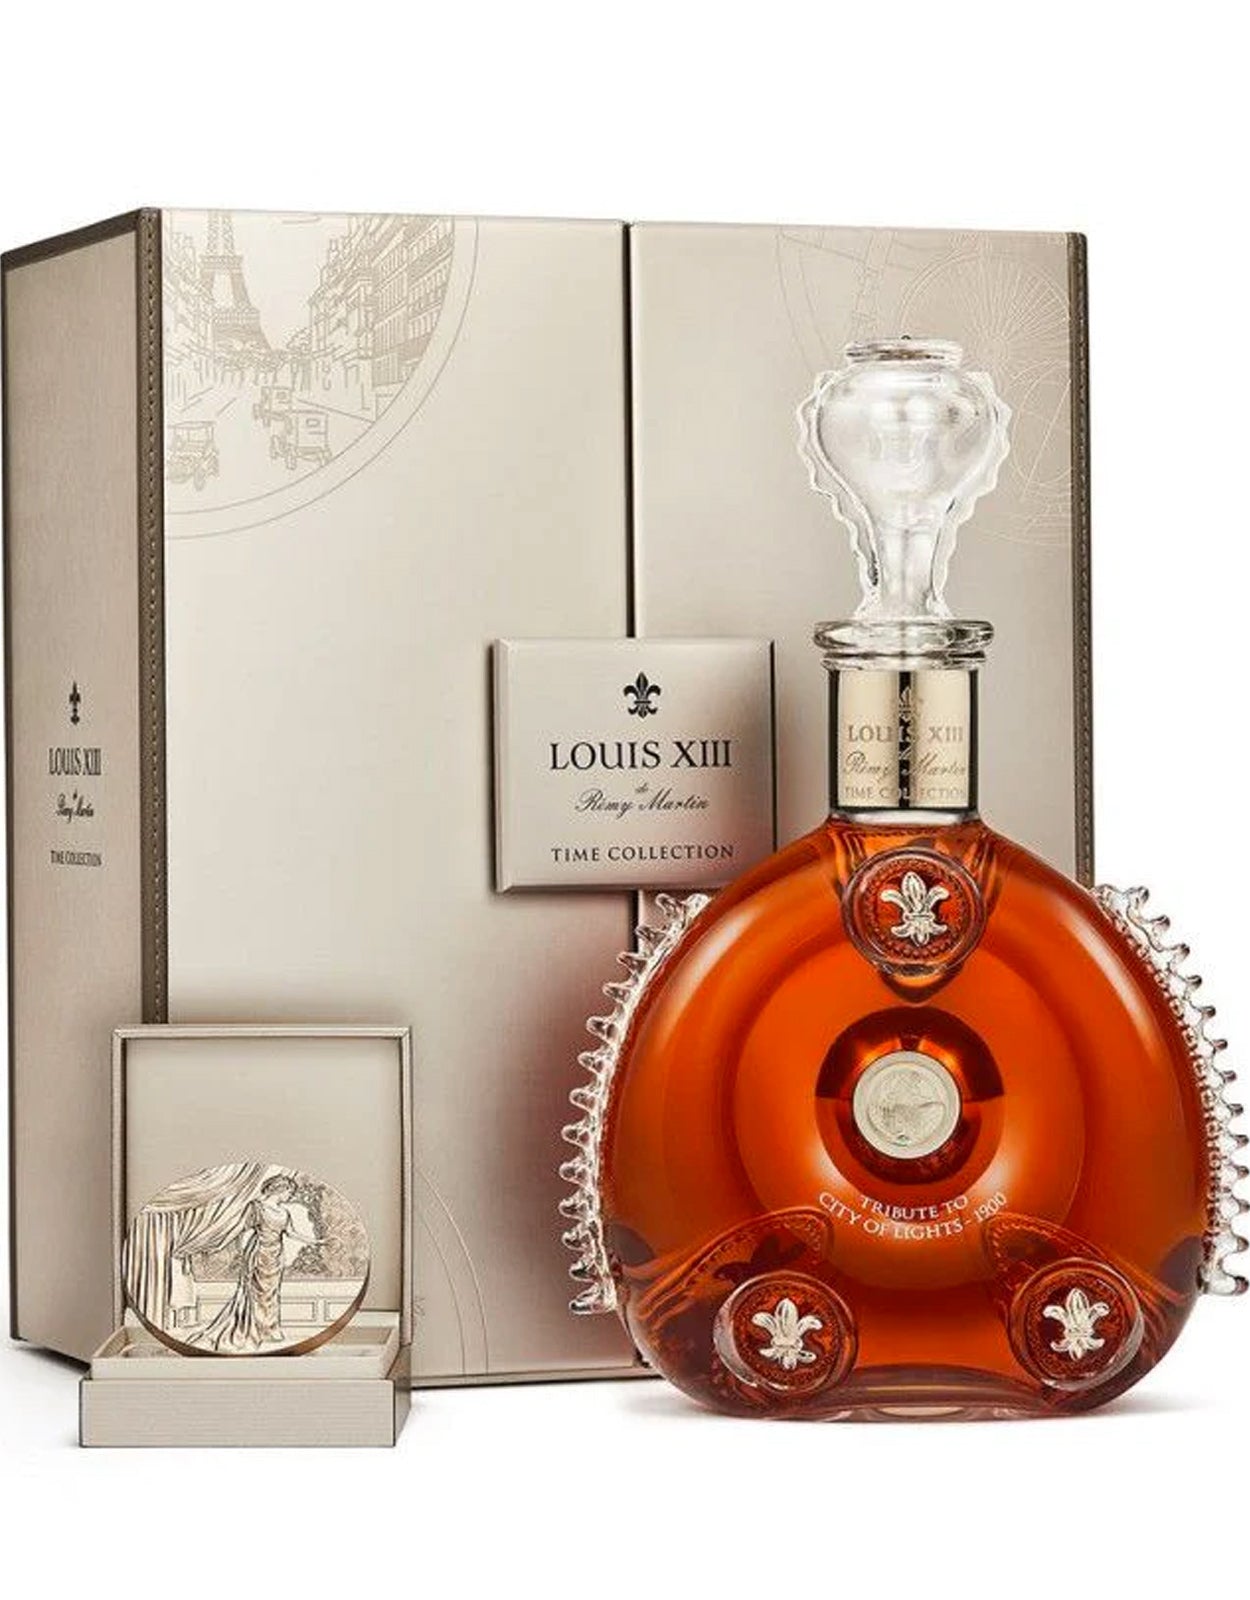 Remy Martin Louis XIII 'Time Collection' - Tribute to City of Lights 1900